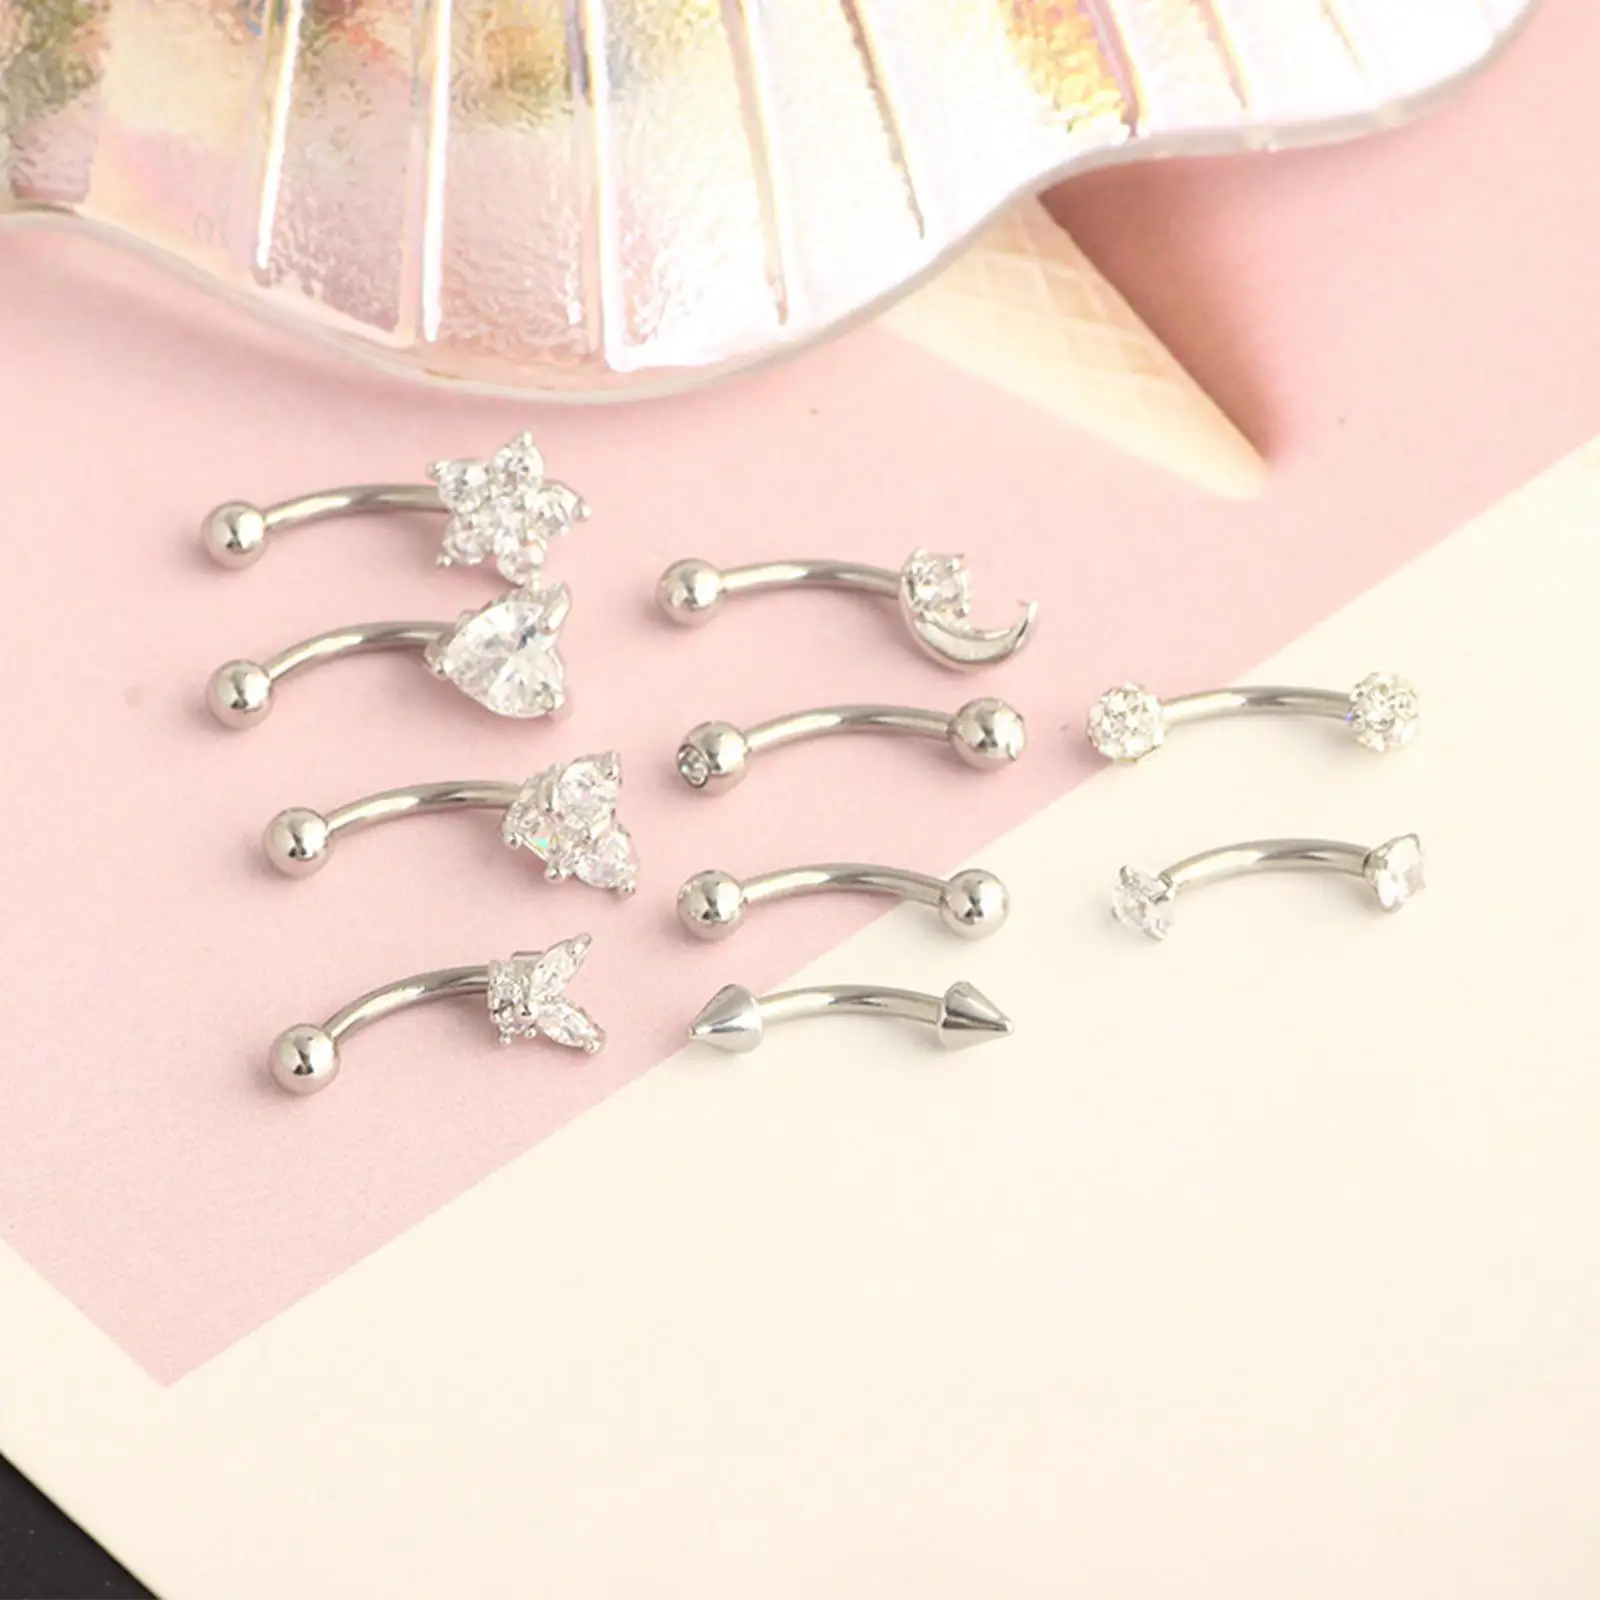 10x Stainlee Steel Nose Ring Eyebrow Lip Studs Earring Mix Styles Diamond Stud Earrings Bar Punk Fashion Butterfly Tragus Stud